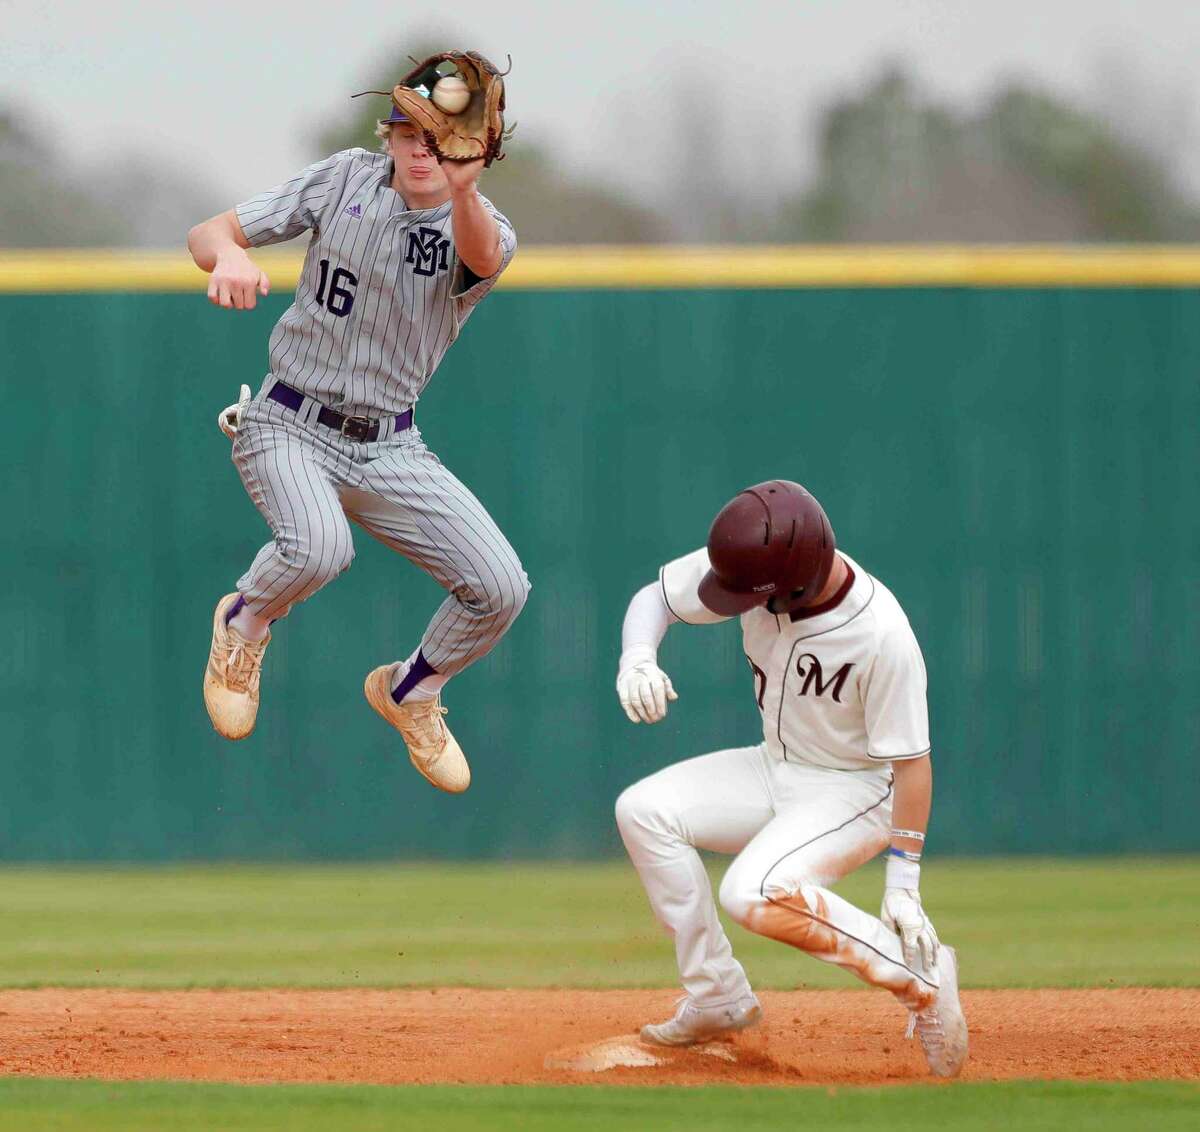 Montgomery shortstop Connor Benge (16) makes a leaping catch as Blake Casey #7 of Magnolia steals second in the fourth inning of a high school baseball game during the Brenham/Montgomery Tournament, Friday, March 4, 2022, in Montgomery.